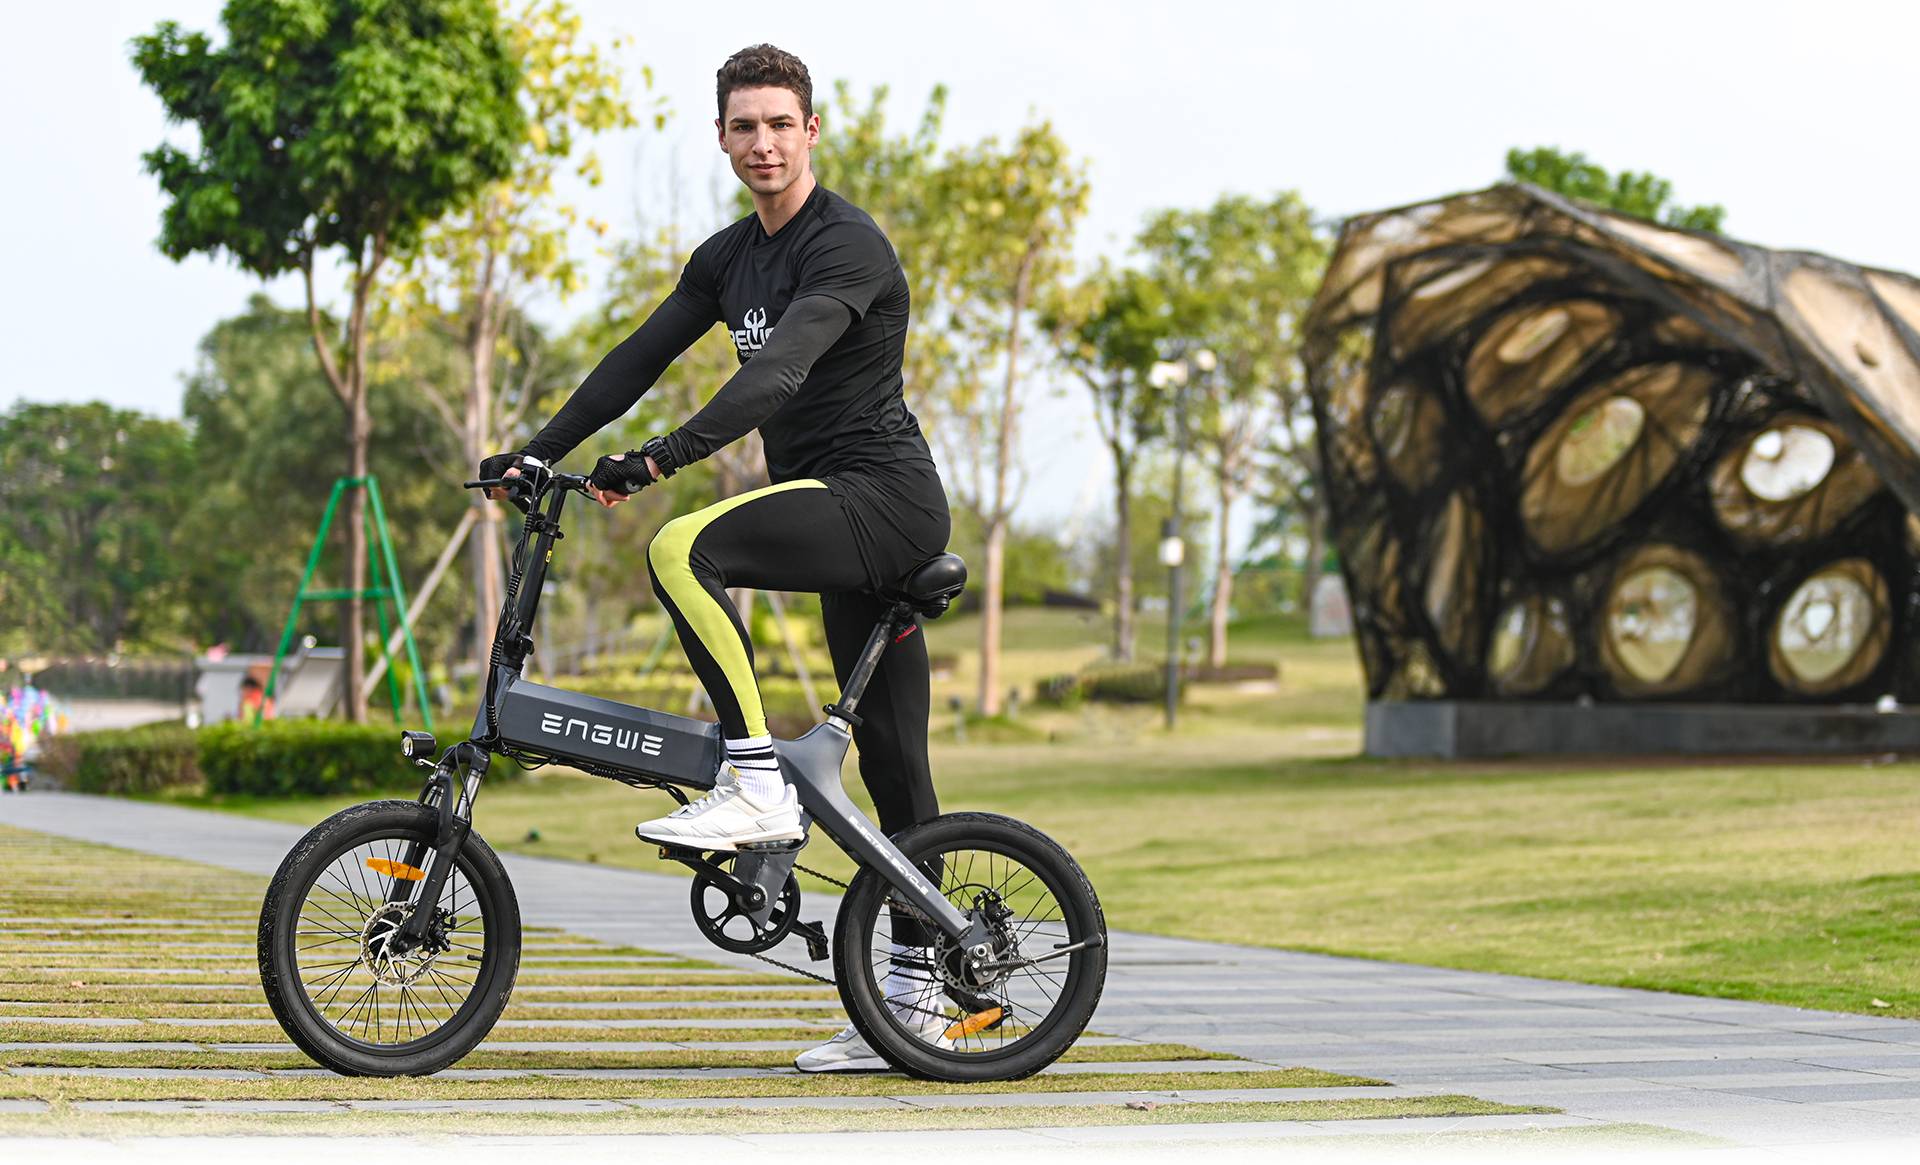 ENGWE C20 Folding Electric Bicycle 20' inch Tires 250W Brushless Motor 36V 10.4Ah Battery 25km/h Max Speed - Gray